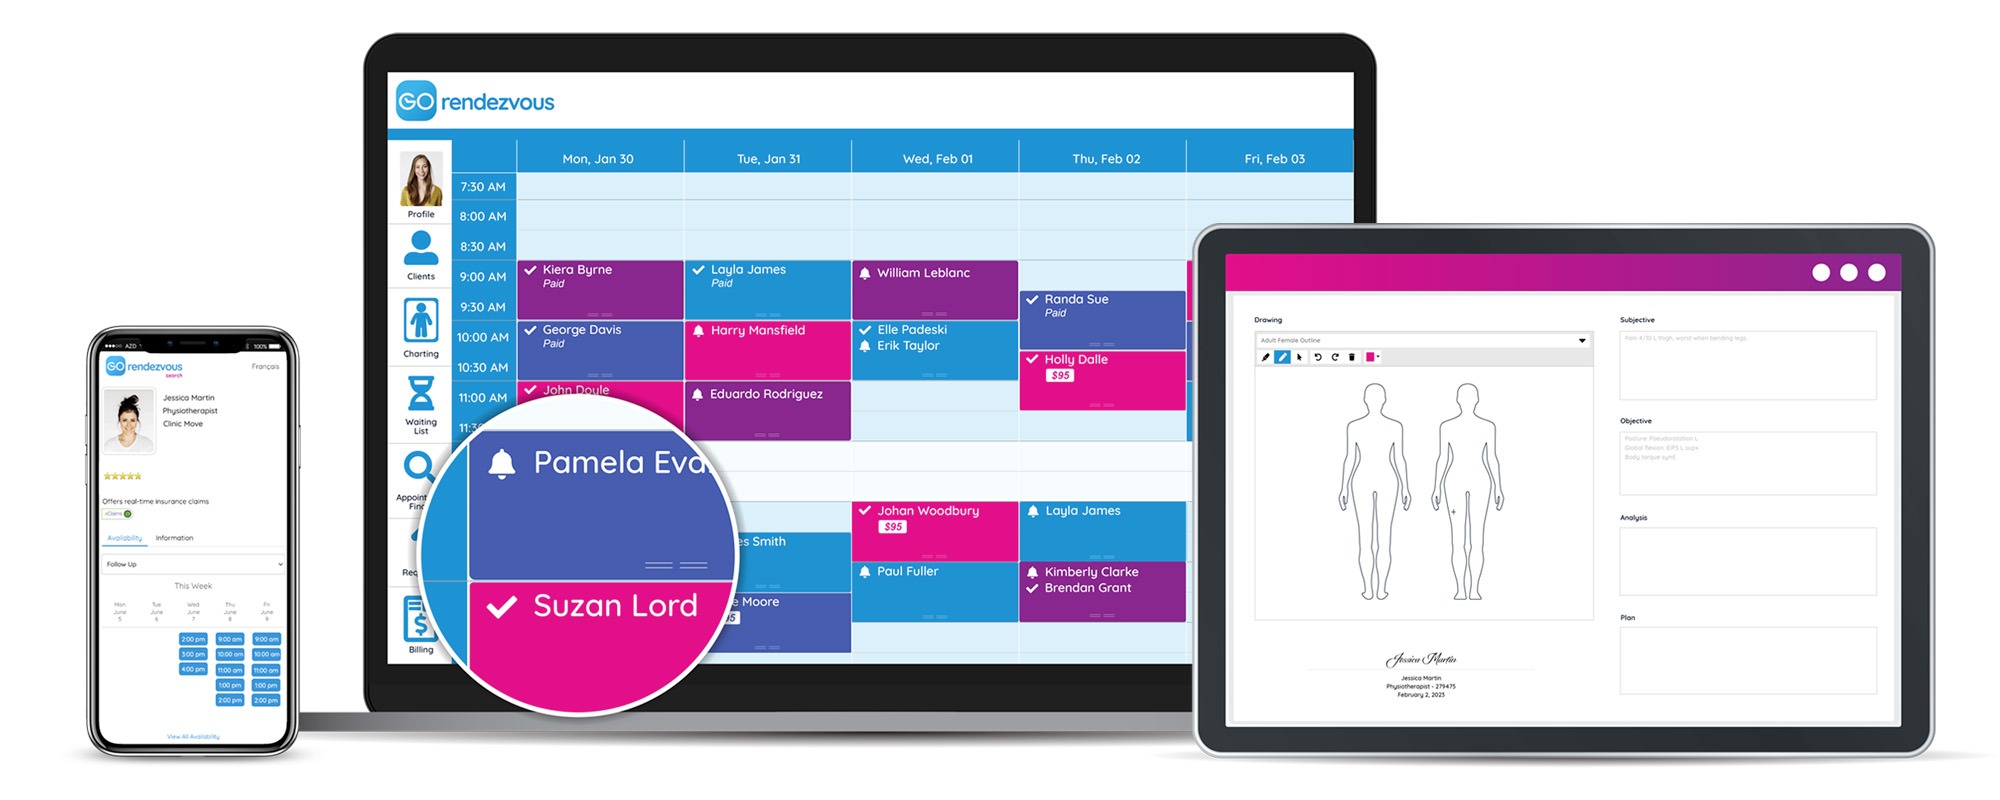 A view of a physiotherapist's GOrendezvous schedule on different devices